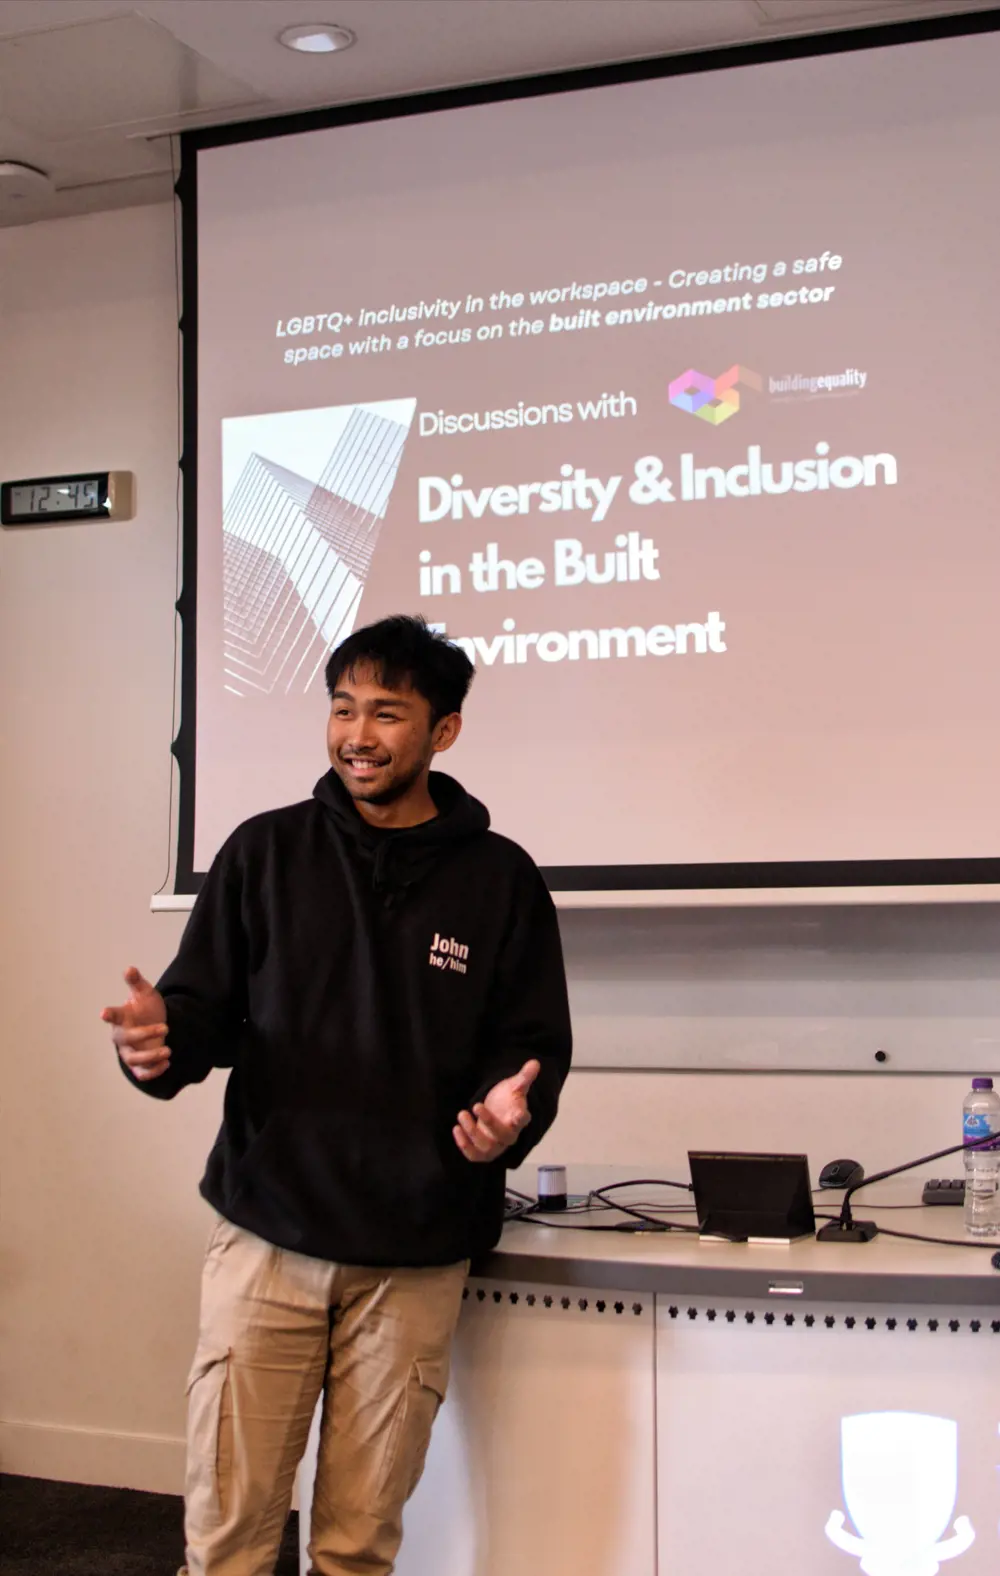 An engineering student giving a talk titled "Diversity & Inclusion in the Built Environment"